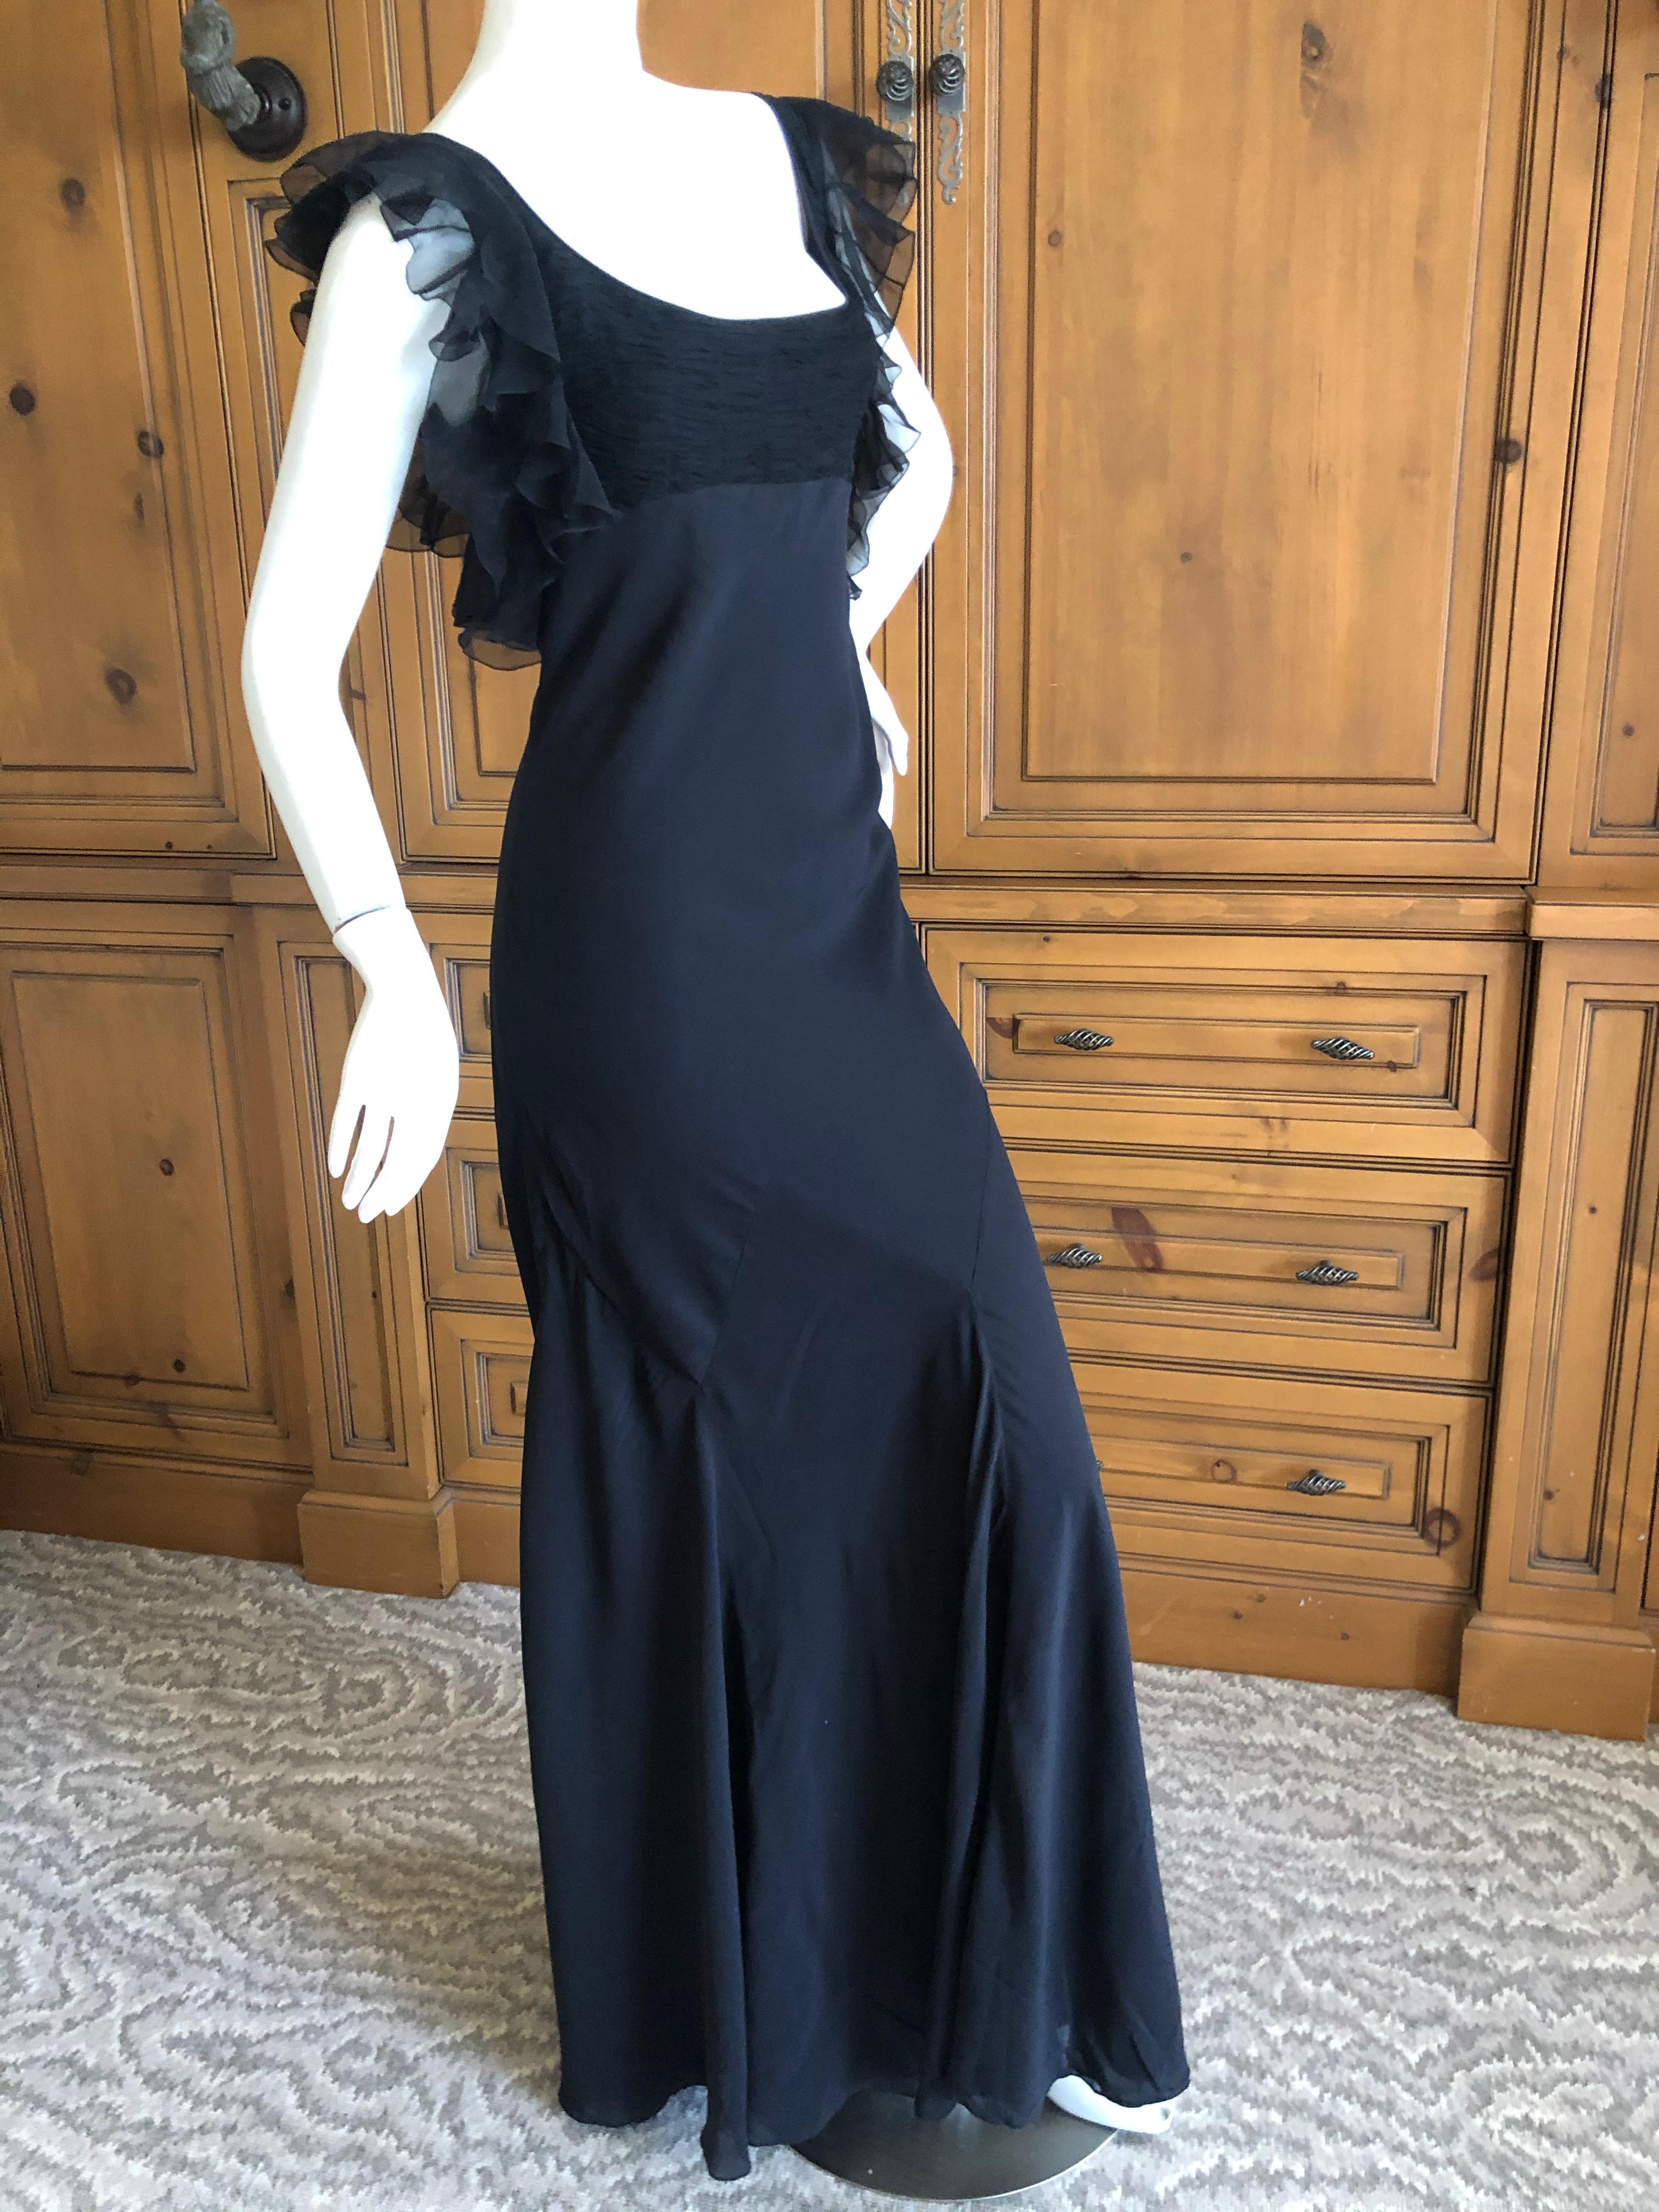 John Galliano Vintage Black Bias Cut Empire Style Evening Dress with Ruffles For Sale 1